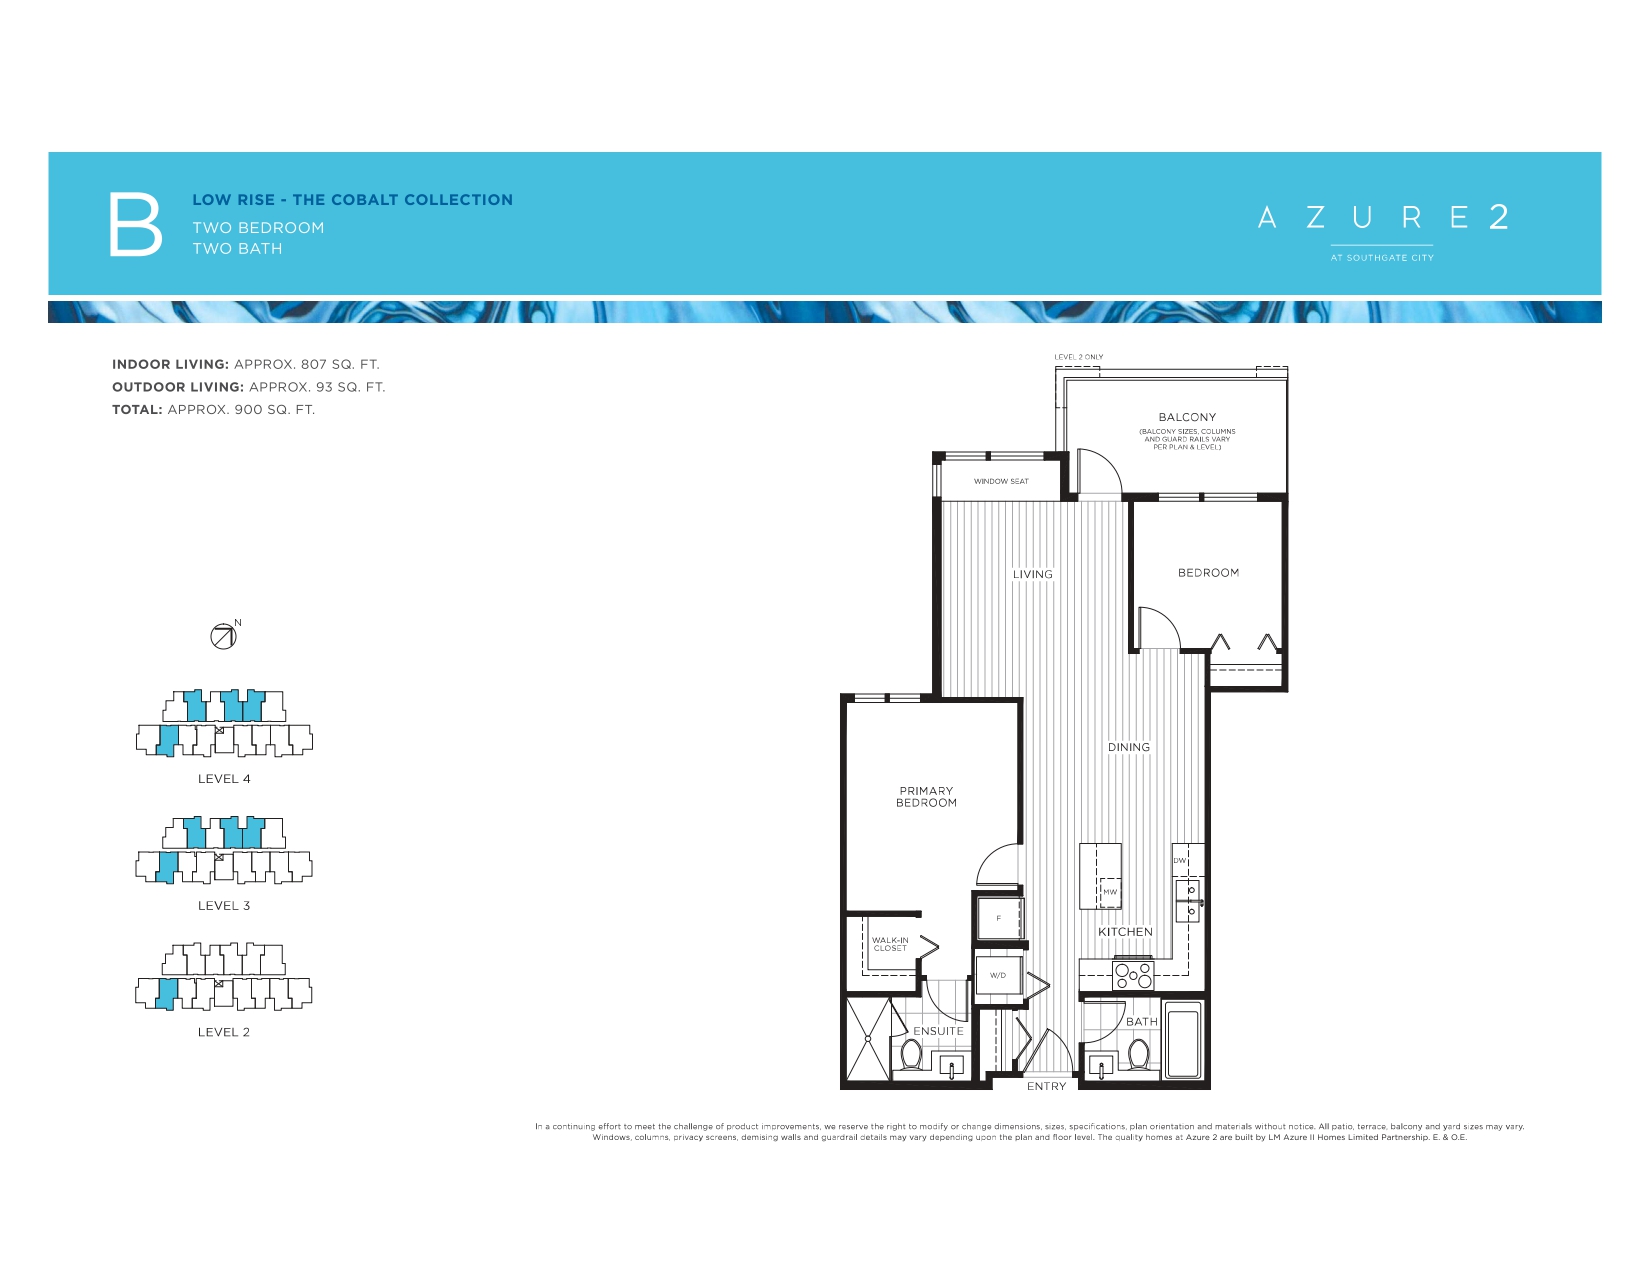 B Floor Plan of Azure 2 Condos with undefined beds